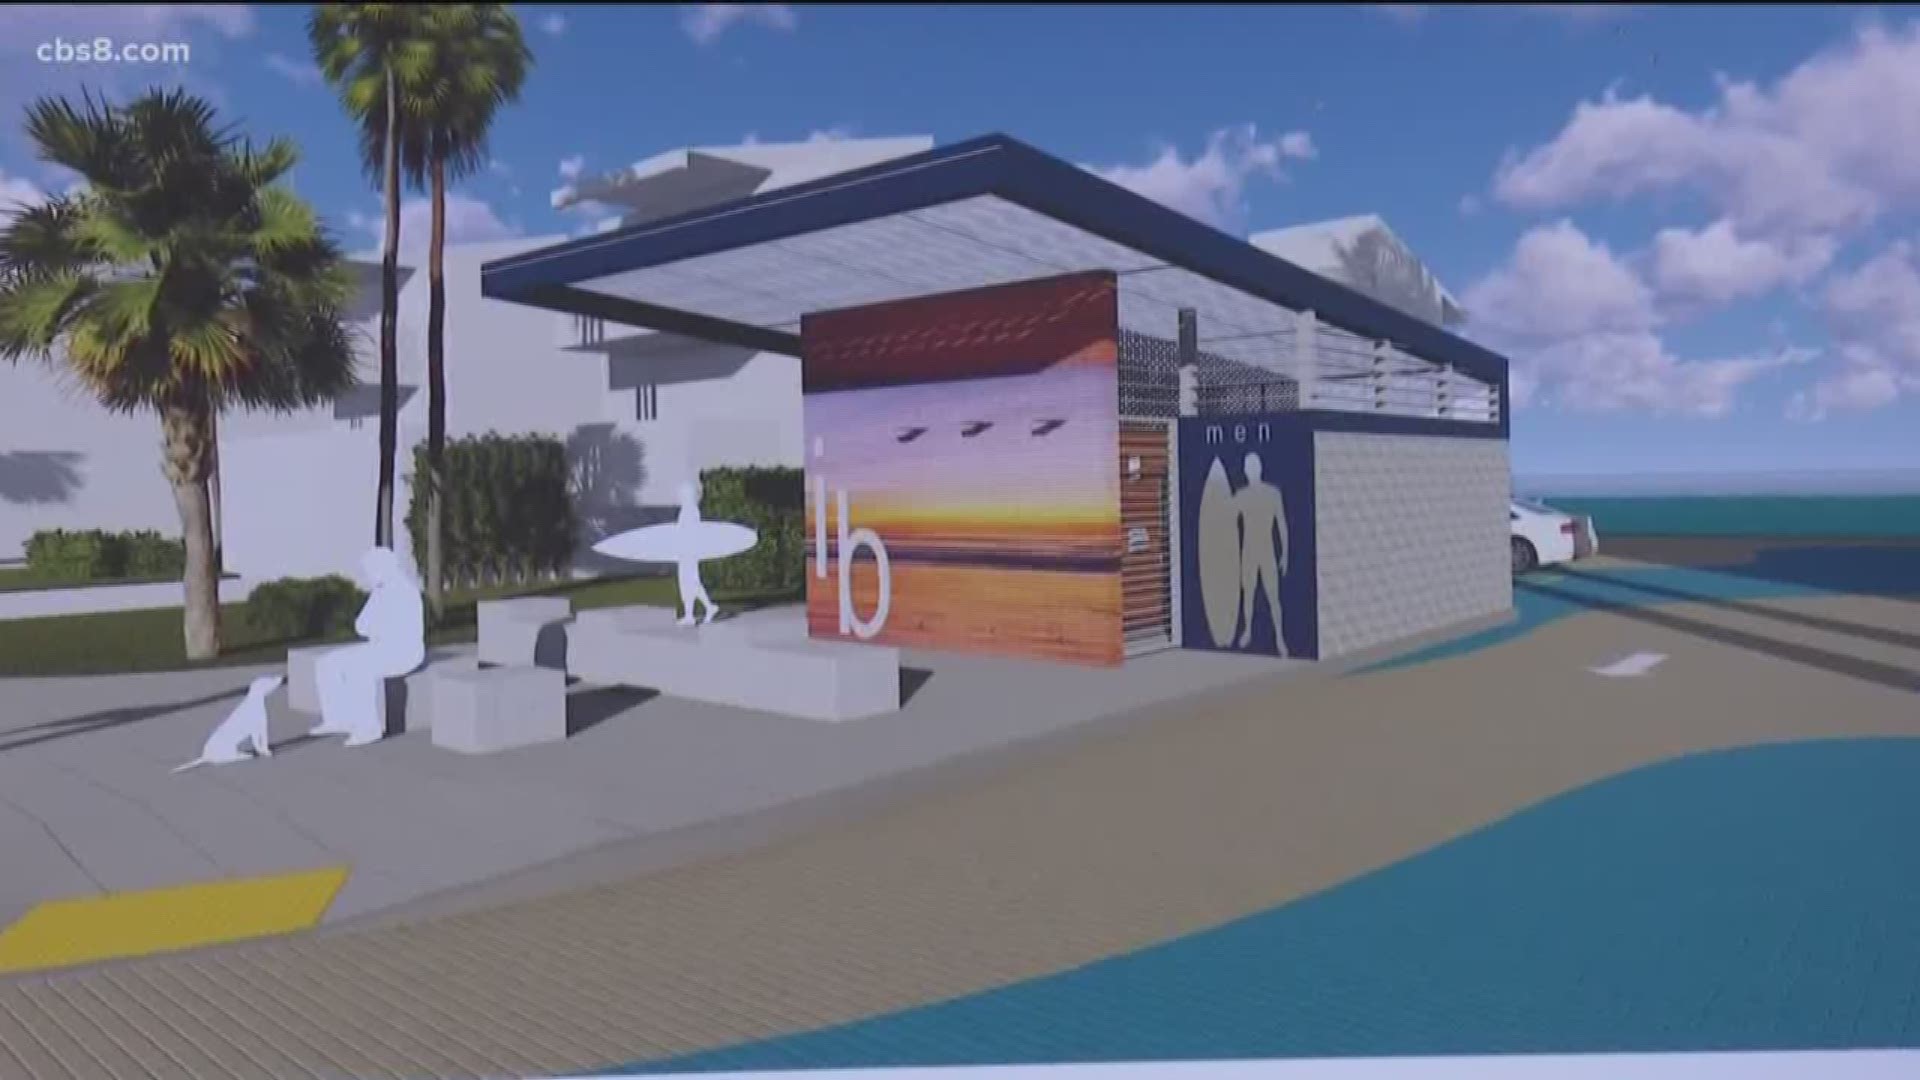 Armed with questions, signs and doubtful stares, dozens of Imperial Beach residents showed up to Beach Avenue Tuesday wanting answers from the city and Port Authority officials regarding a proposal to build a structure that would include public restrooms and showers.